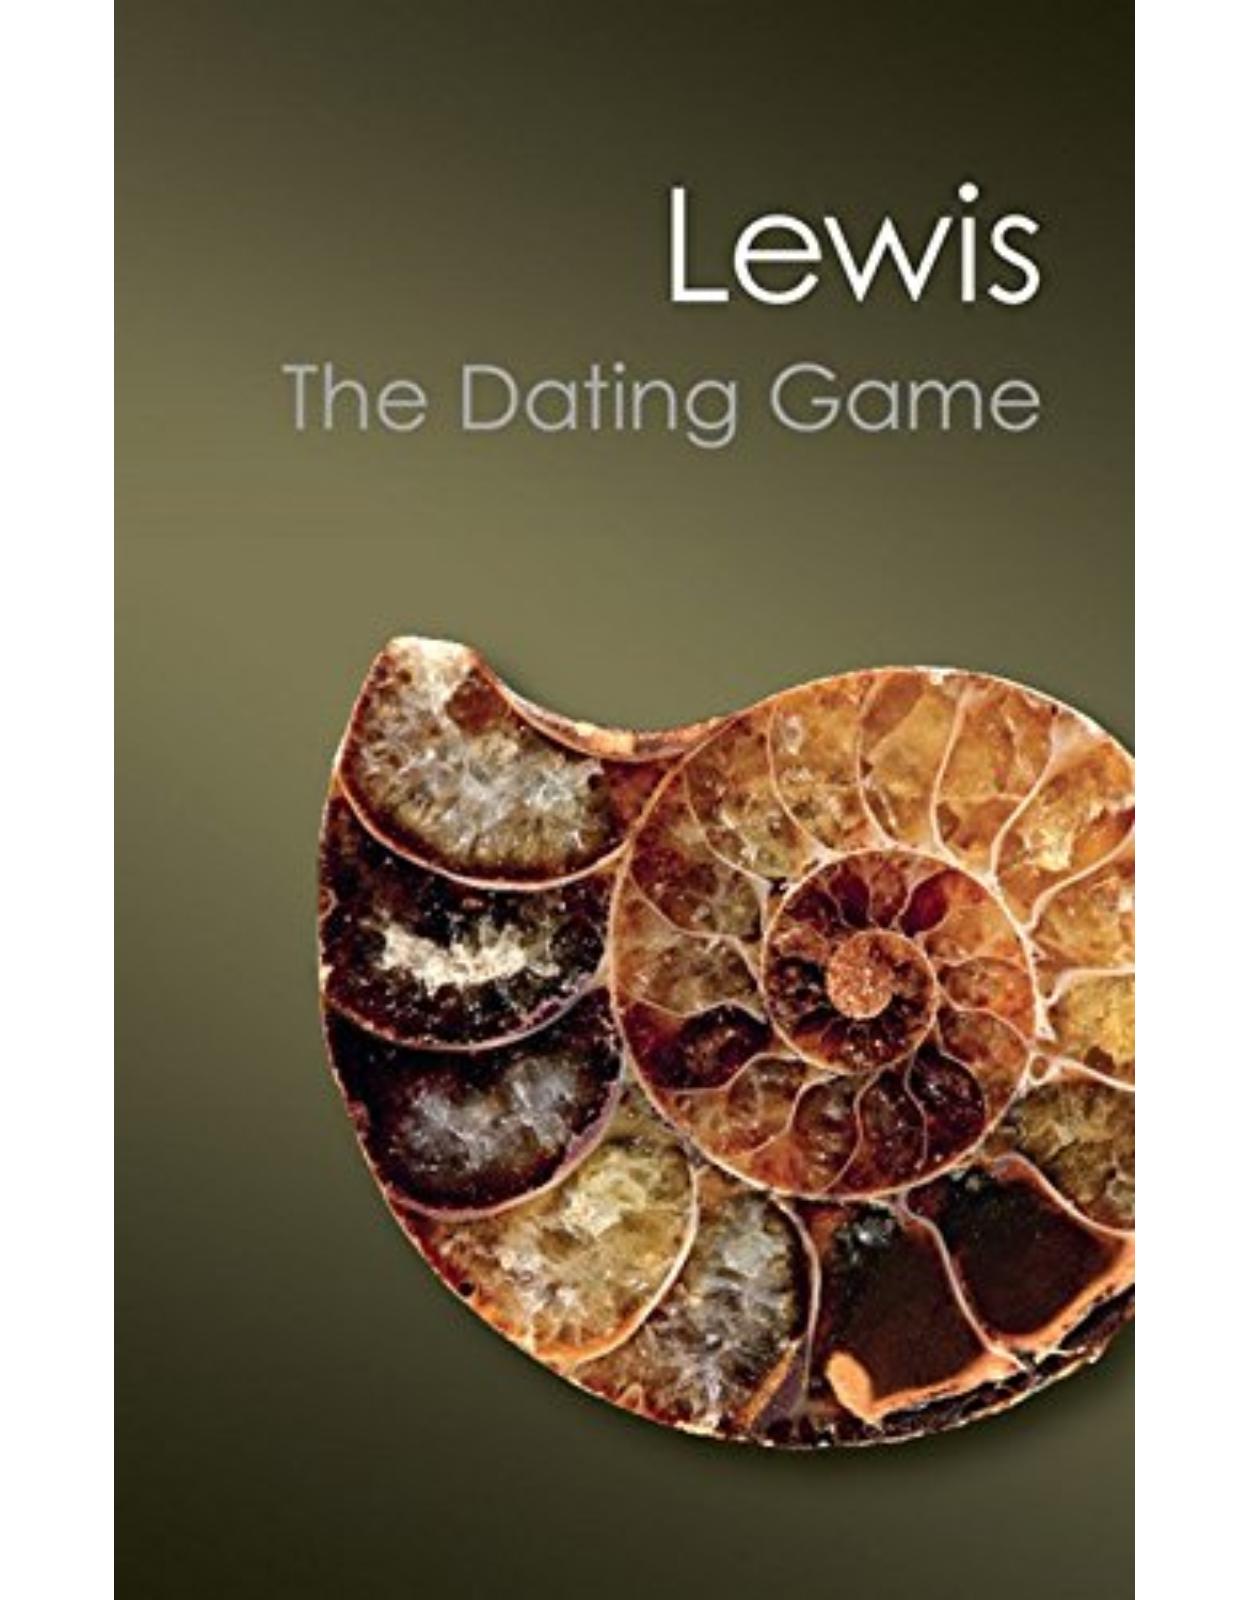 The Dating Game: One Man's Search for the Age of the Earth (Canto Classics)